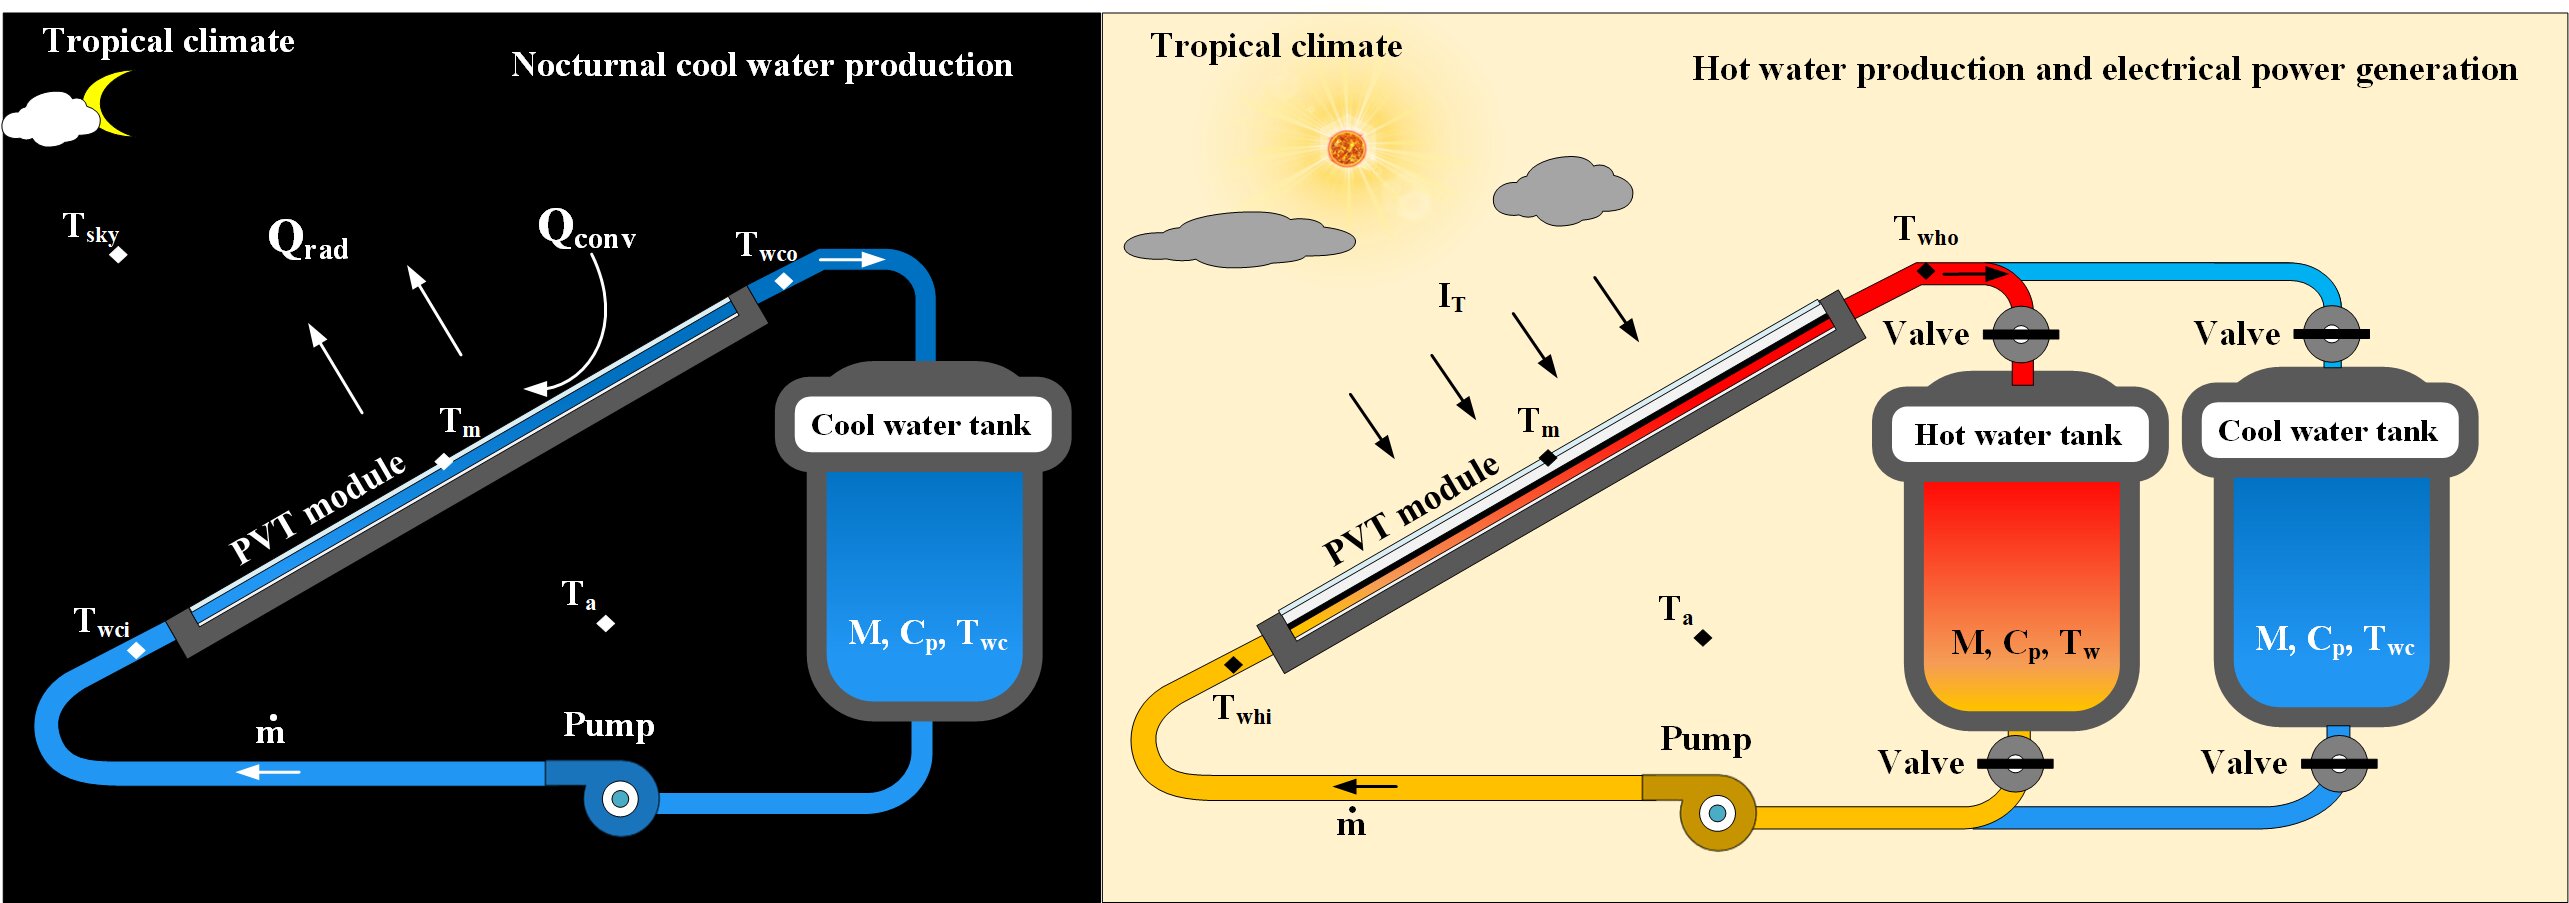 Performance on Power, Hot and Cold Water Generation of a Hybrid Photovoltaic Thermal Module